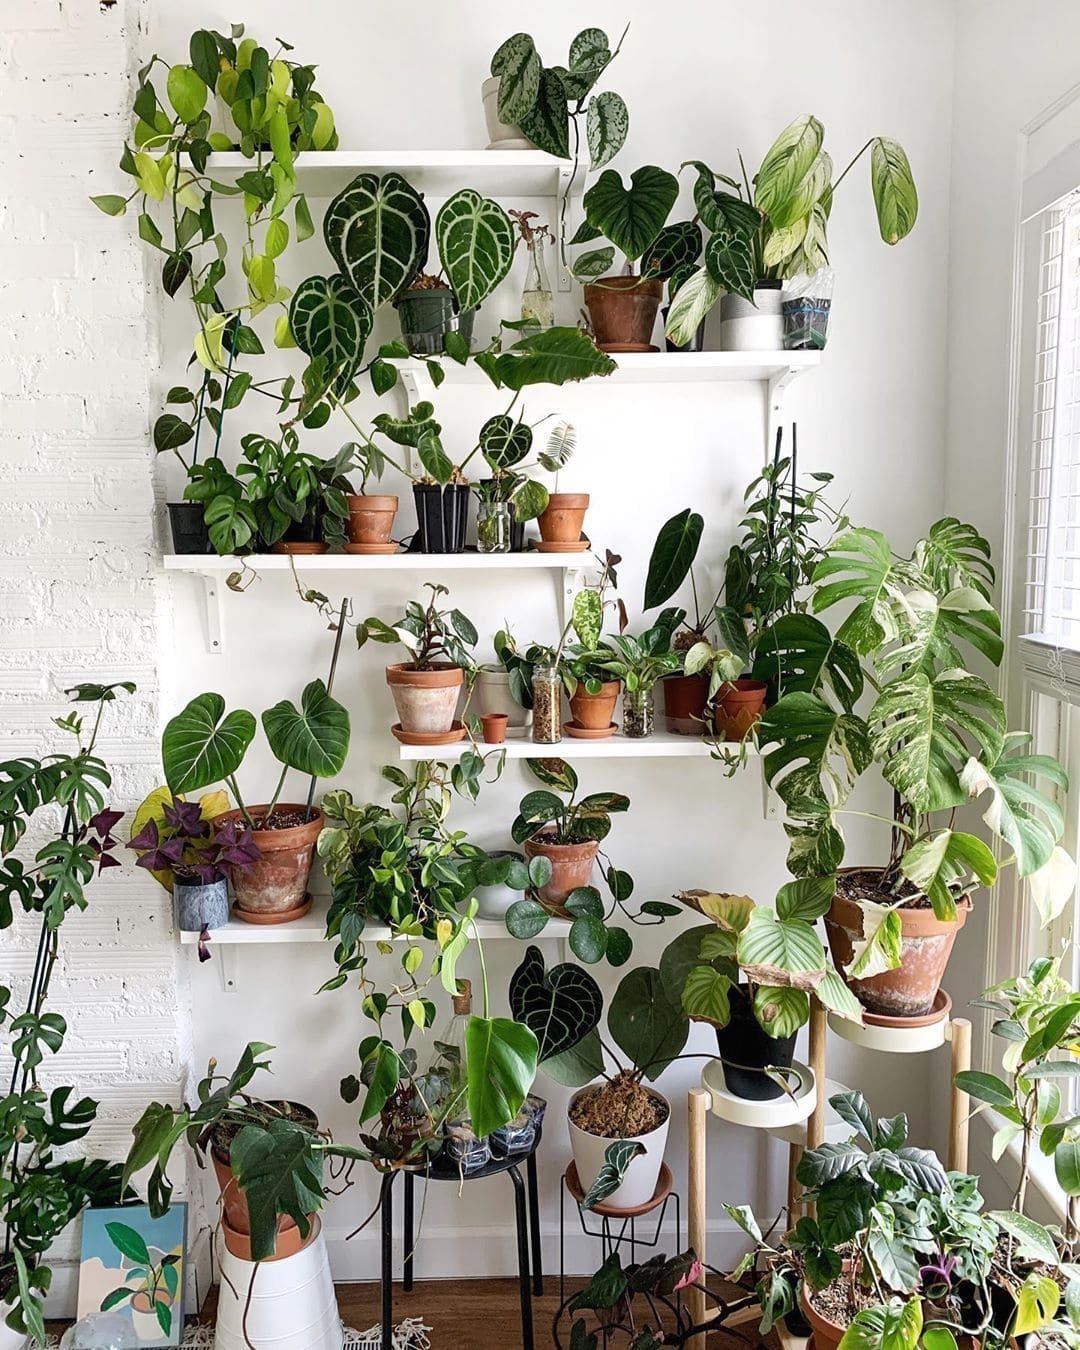 26 creative ideas to make your home greener - 81